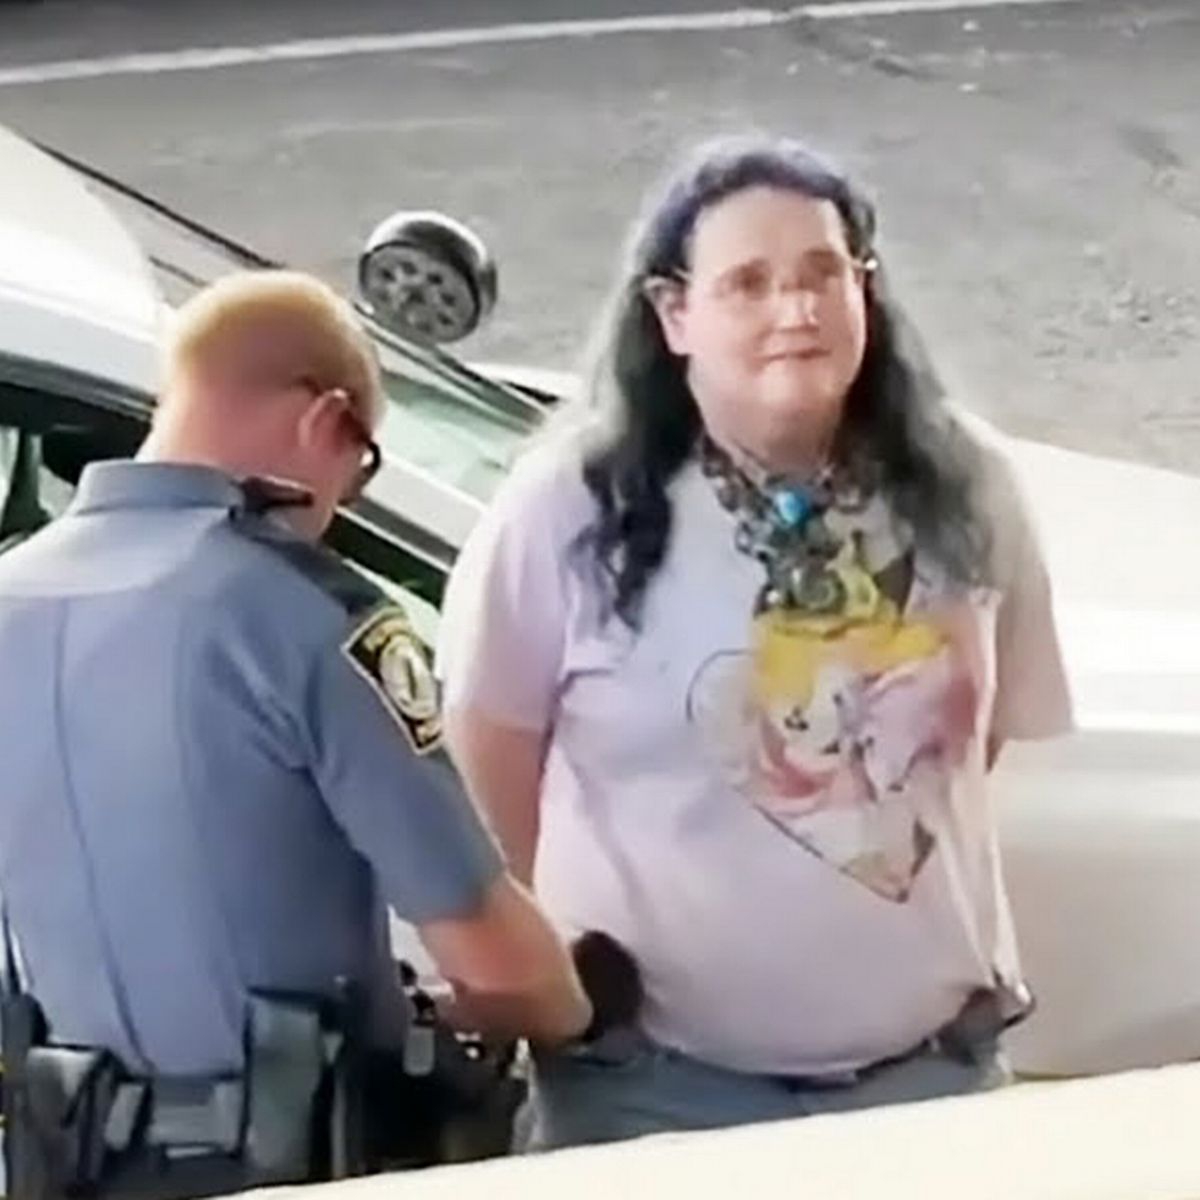 Chris Chan arrested on incest charges after 'sex attack on the family member